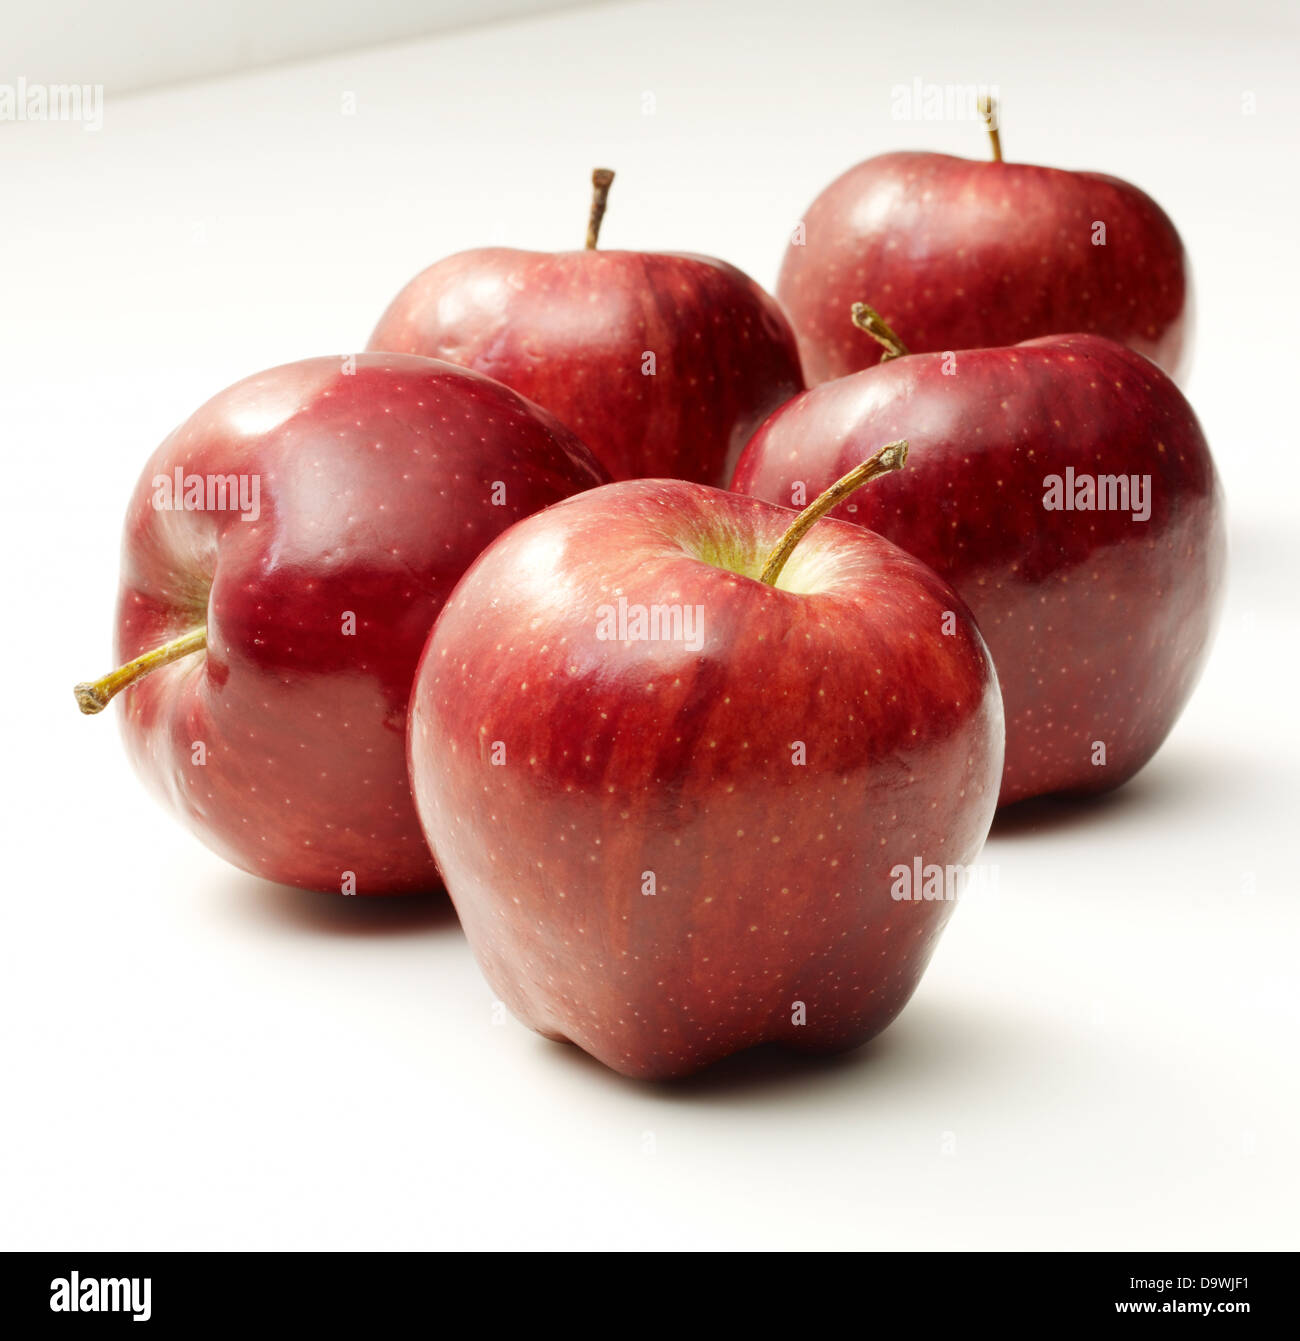 Red apples Stock Photo